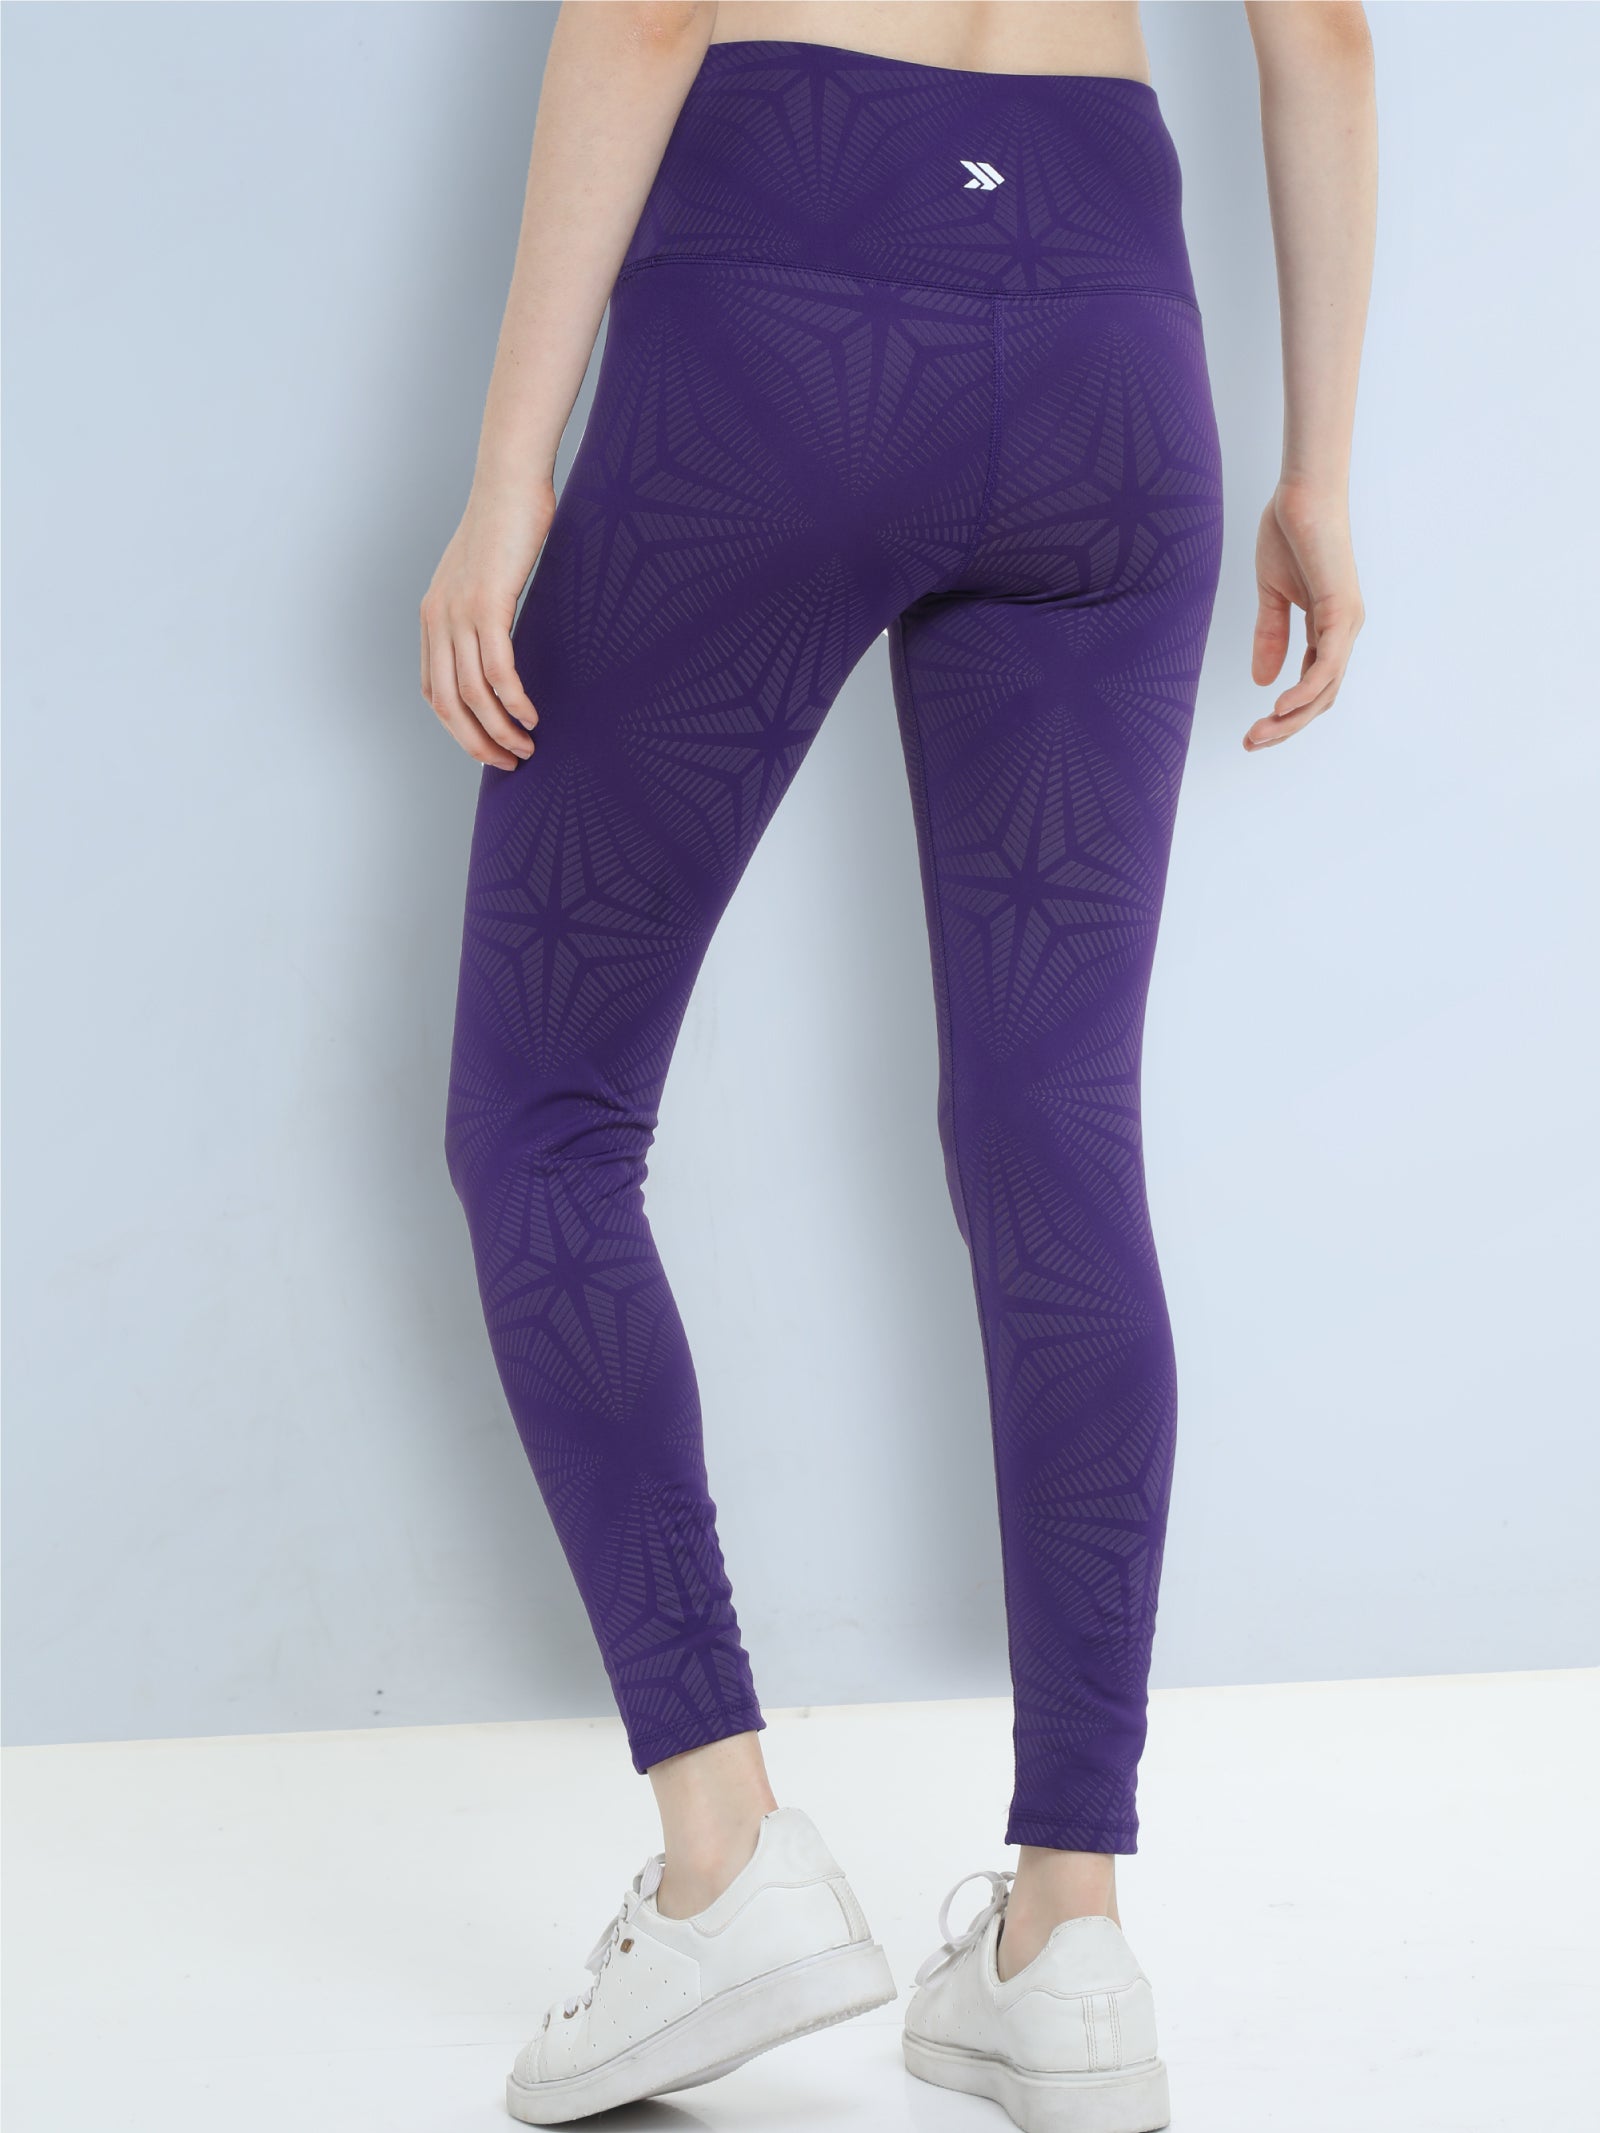 TURQUOISE, PURPLE, BLACK. LEGGINGS DEPOT. ONE SIZE. STRETCH. DOUBLE  STITCHED.